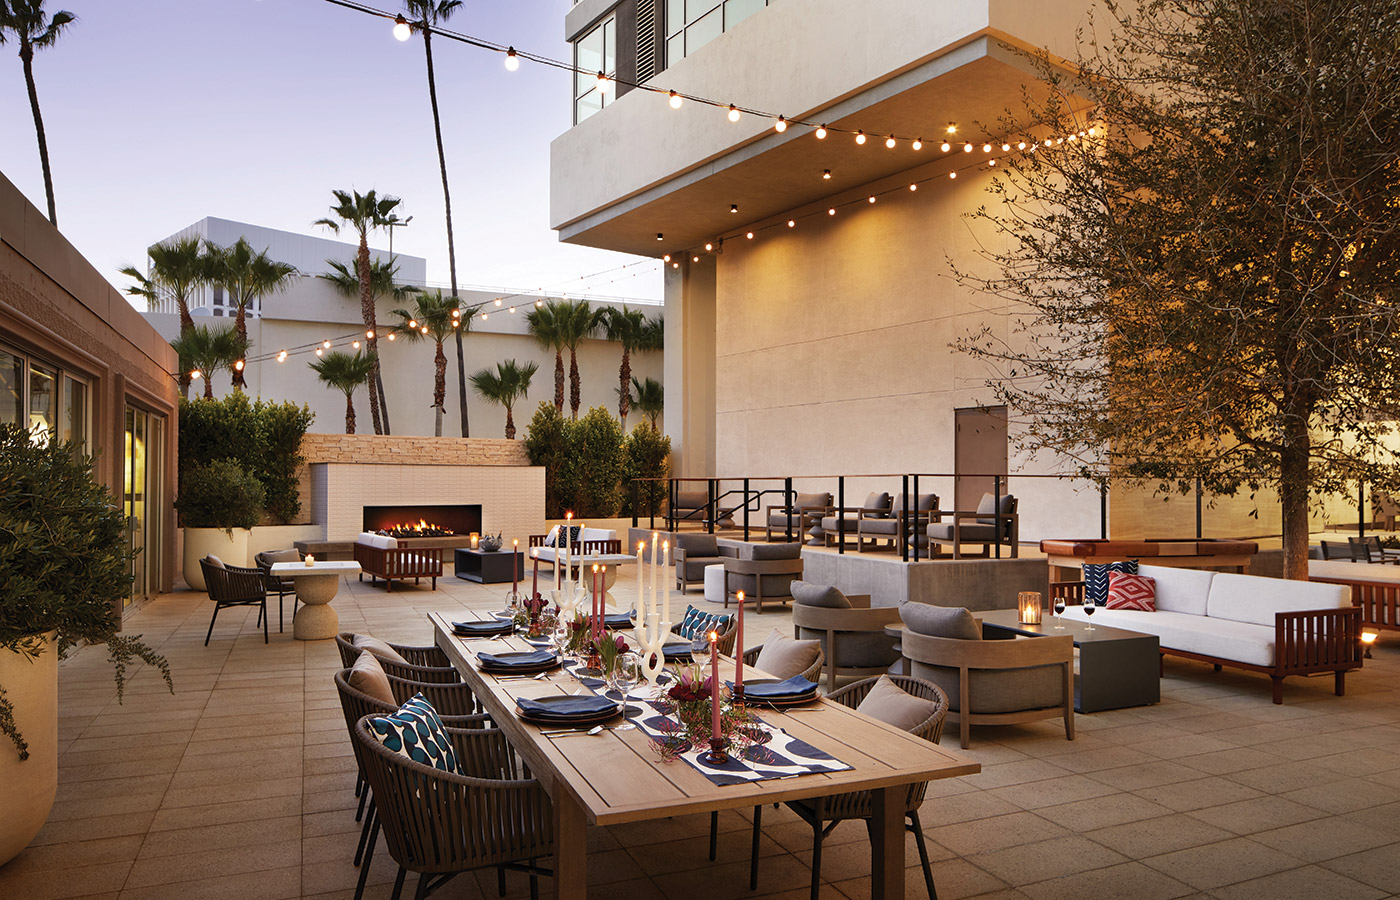 The patio at The Watermark at Westwood Village.